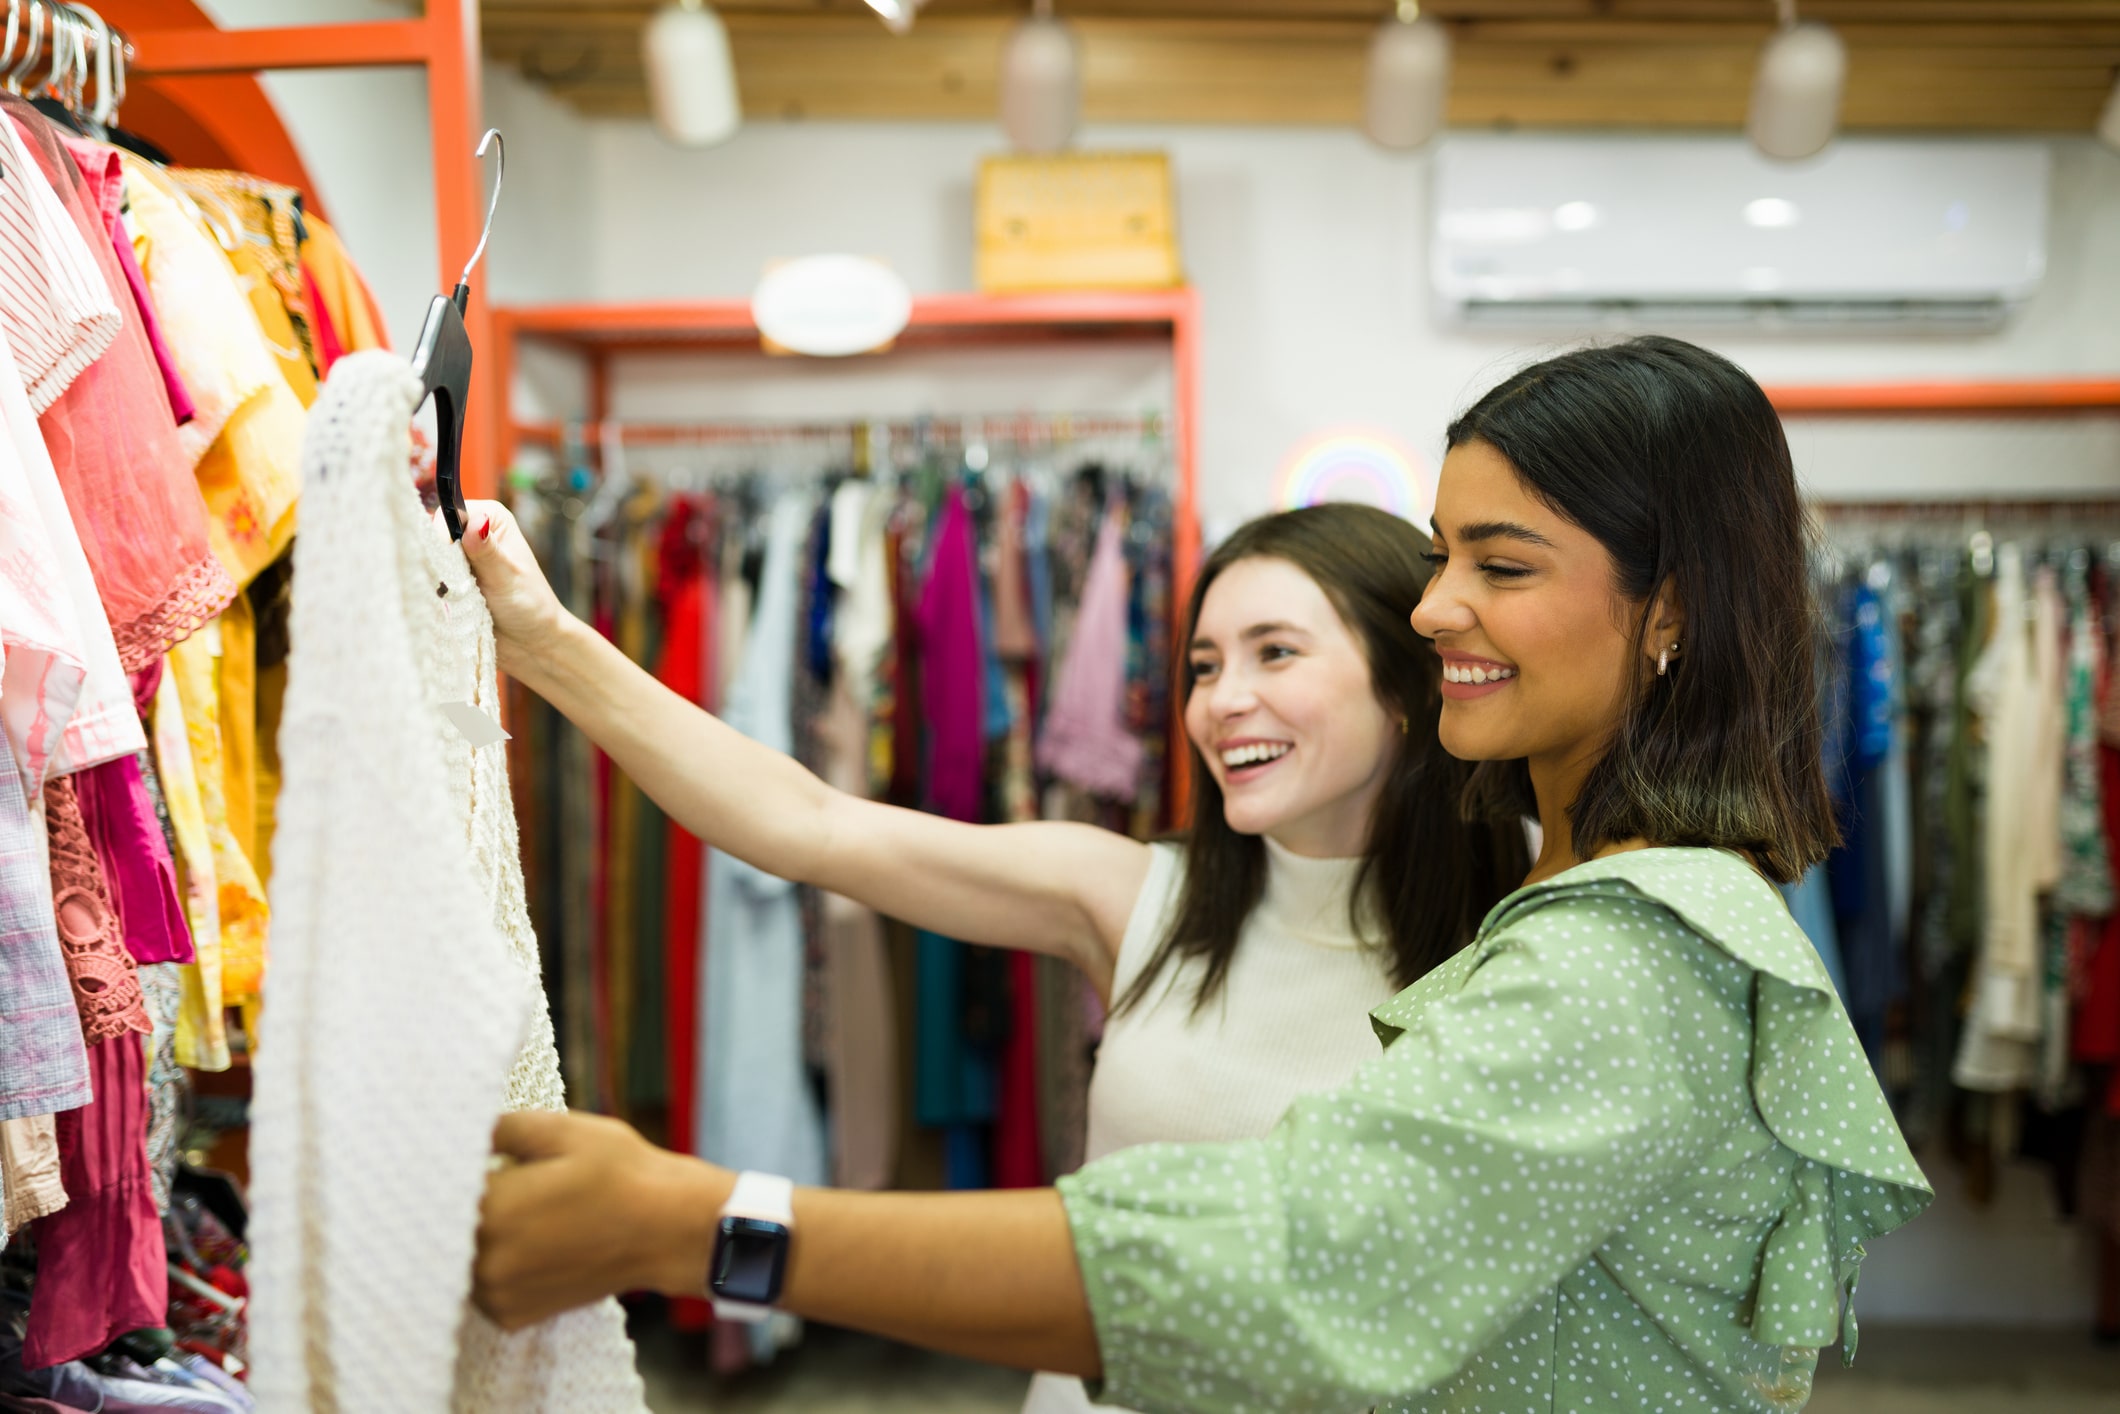 10 surprising ways to save money: Young women searching for a new dress at the clothing rack while shopping at a thrift store